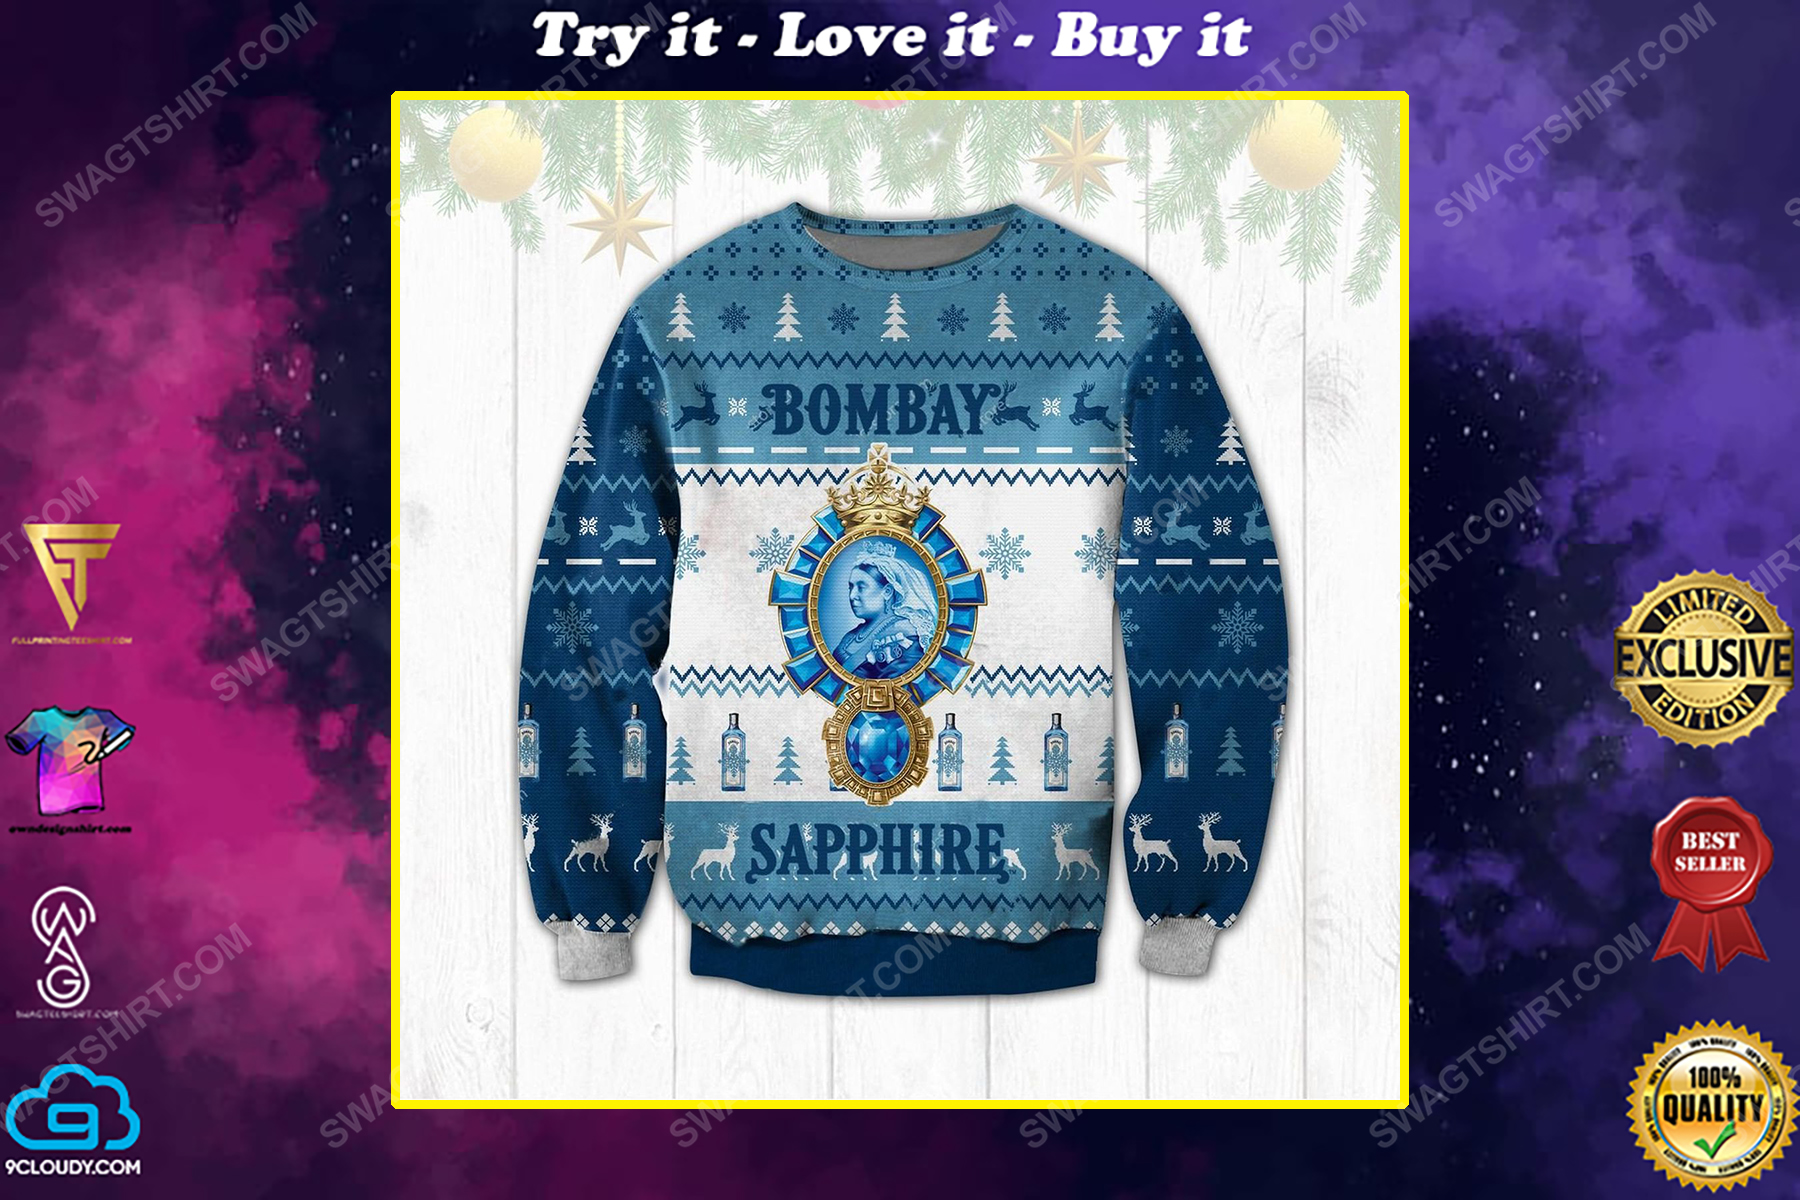 The bombay sapphire gin ugly christmas sweater